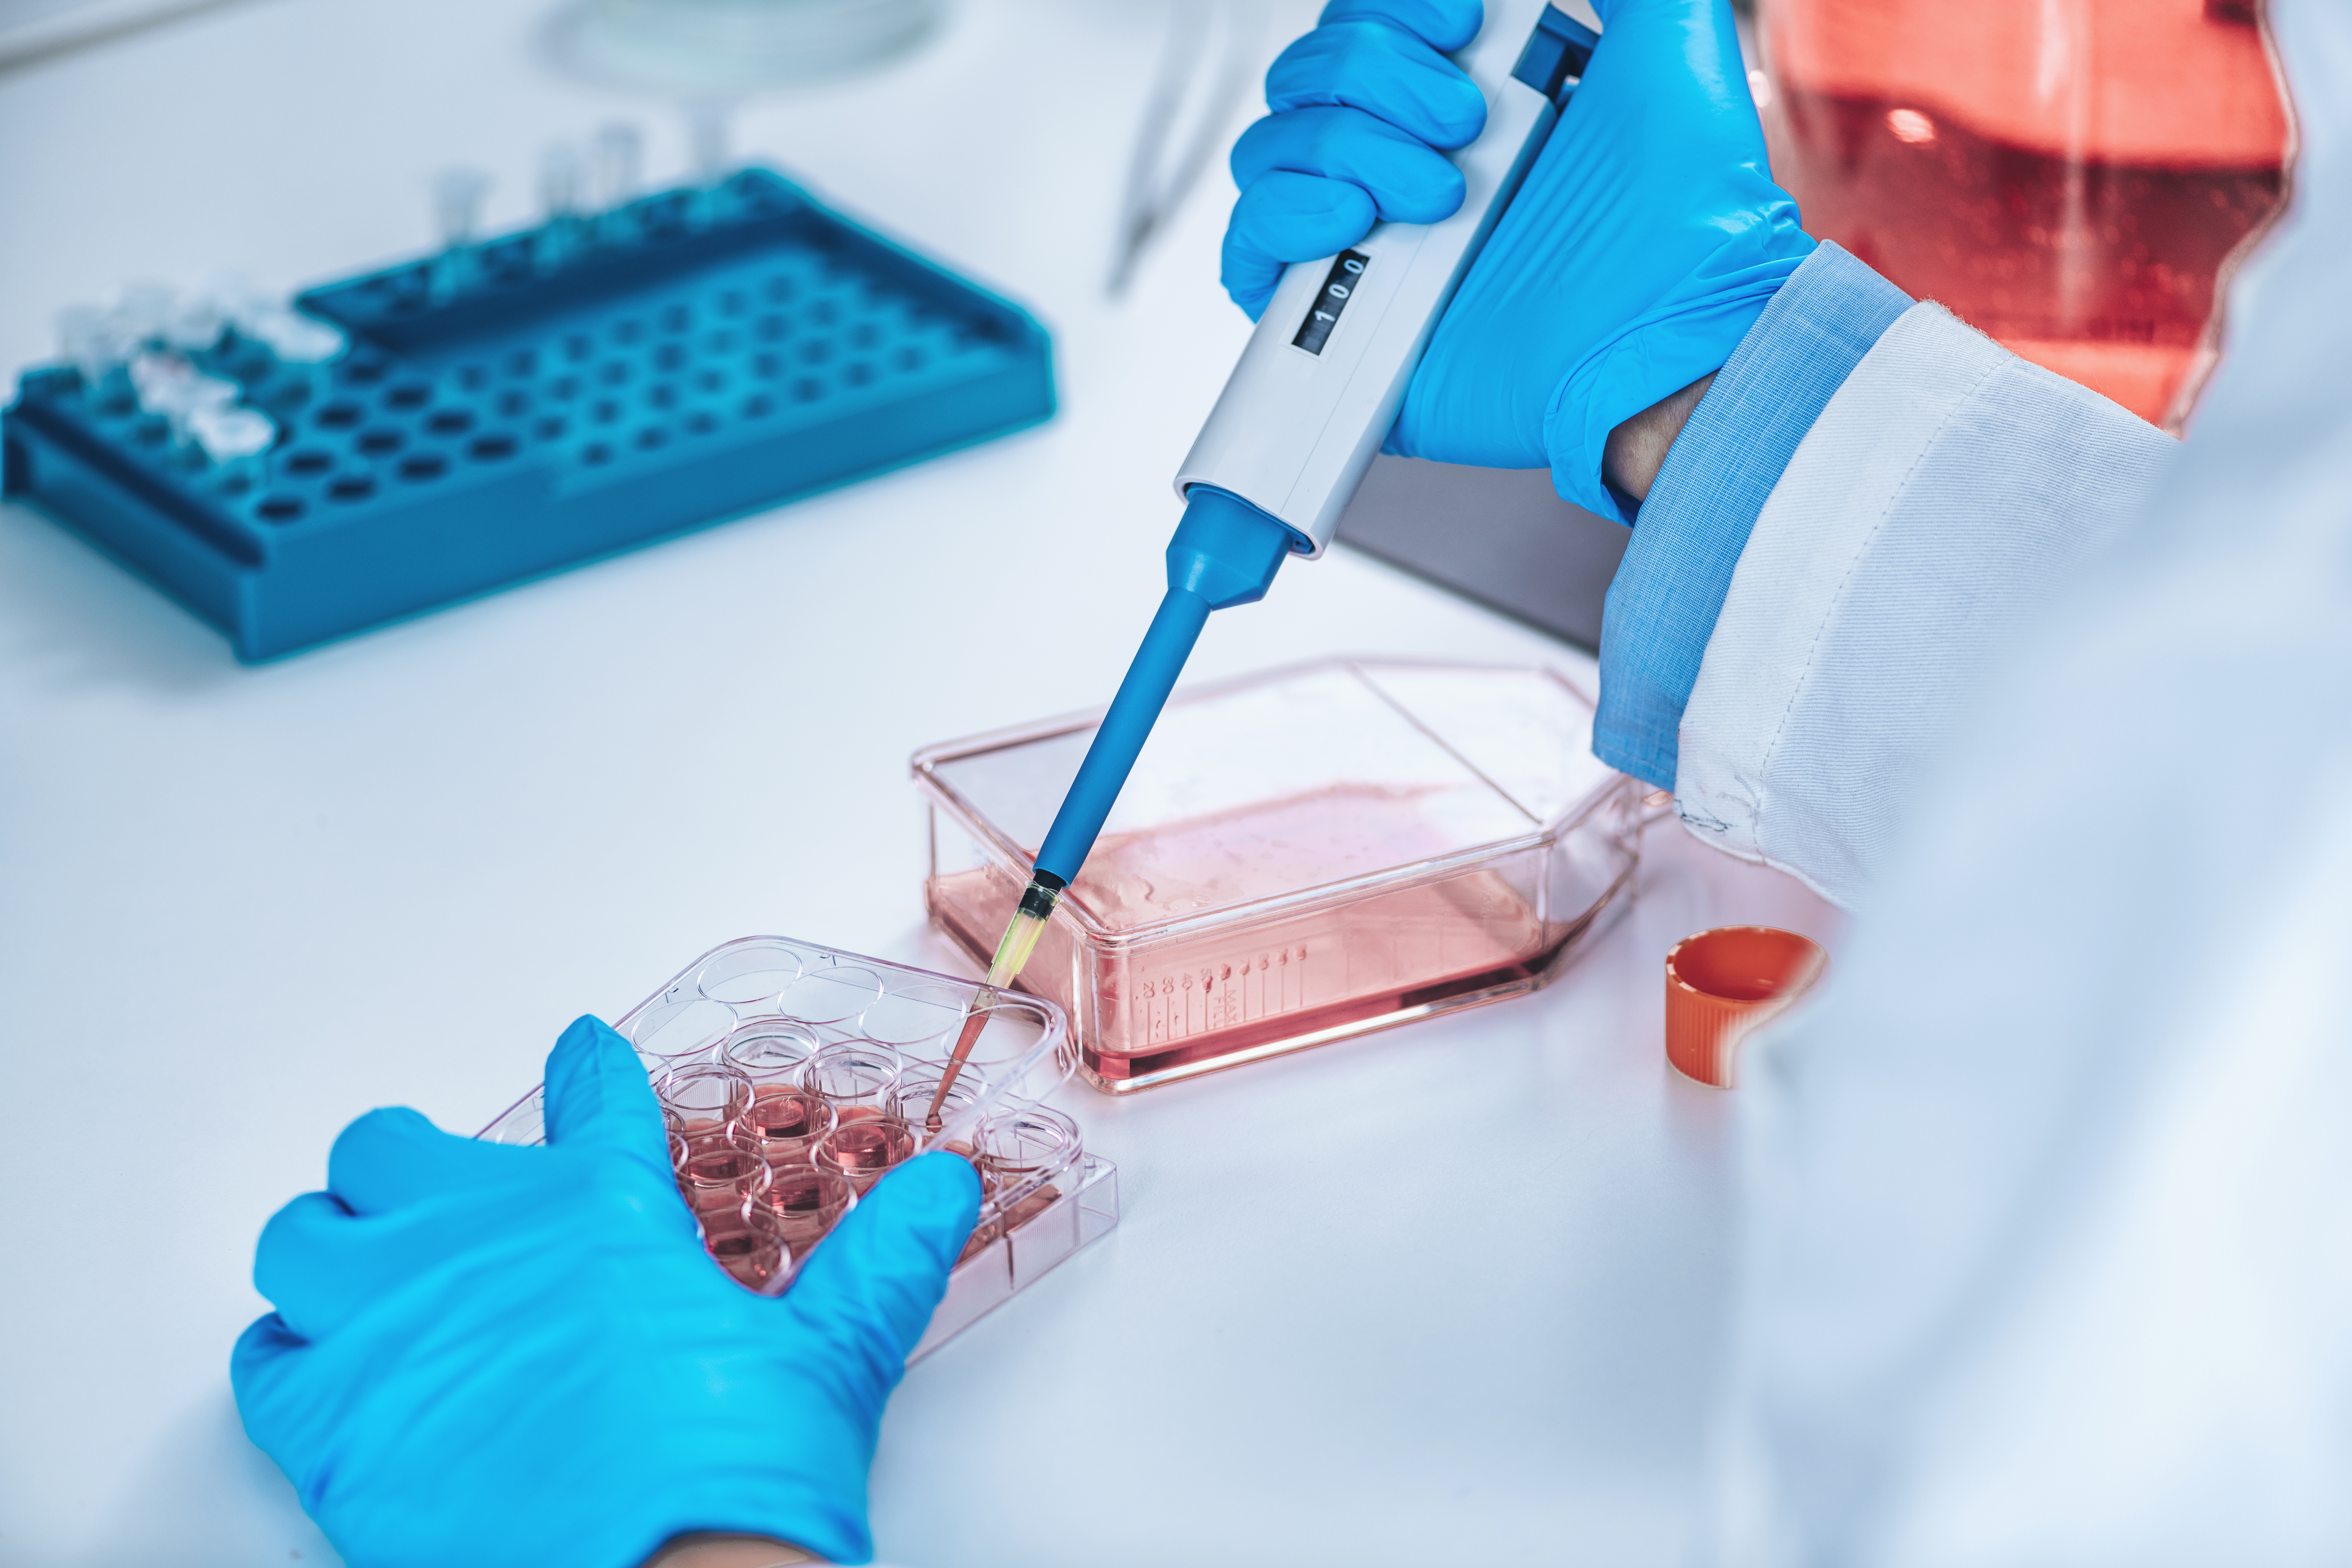 Researcher working with cell culture (source: Envato)